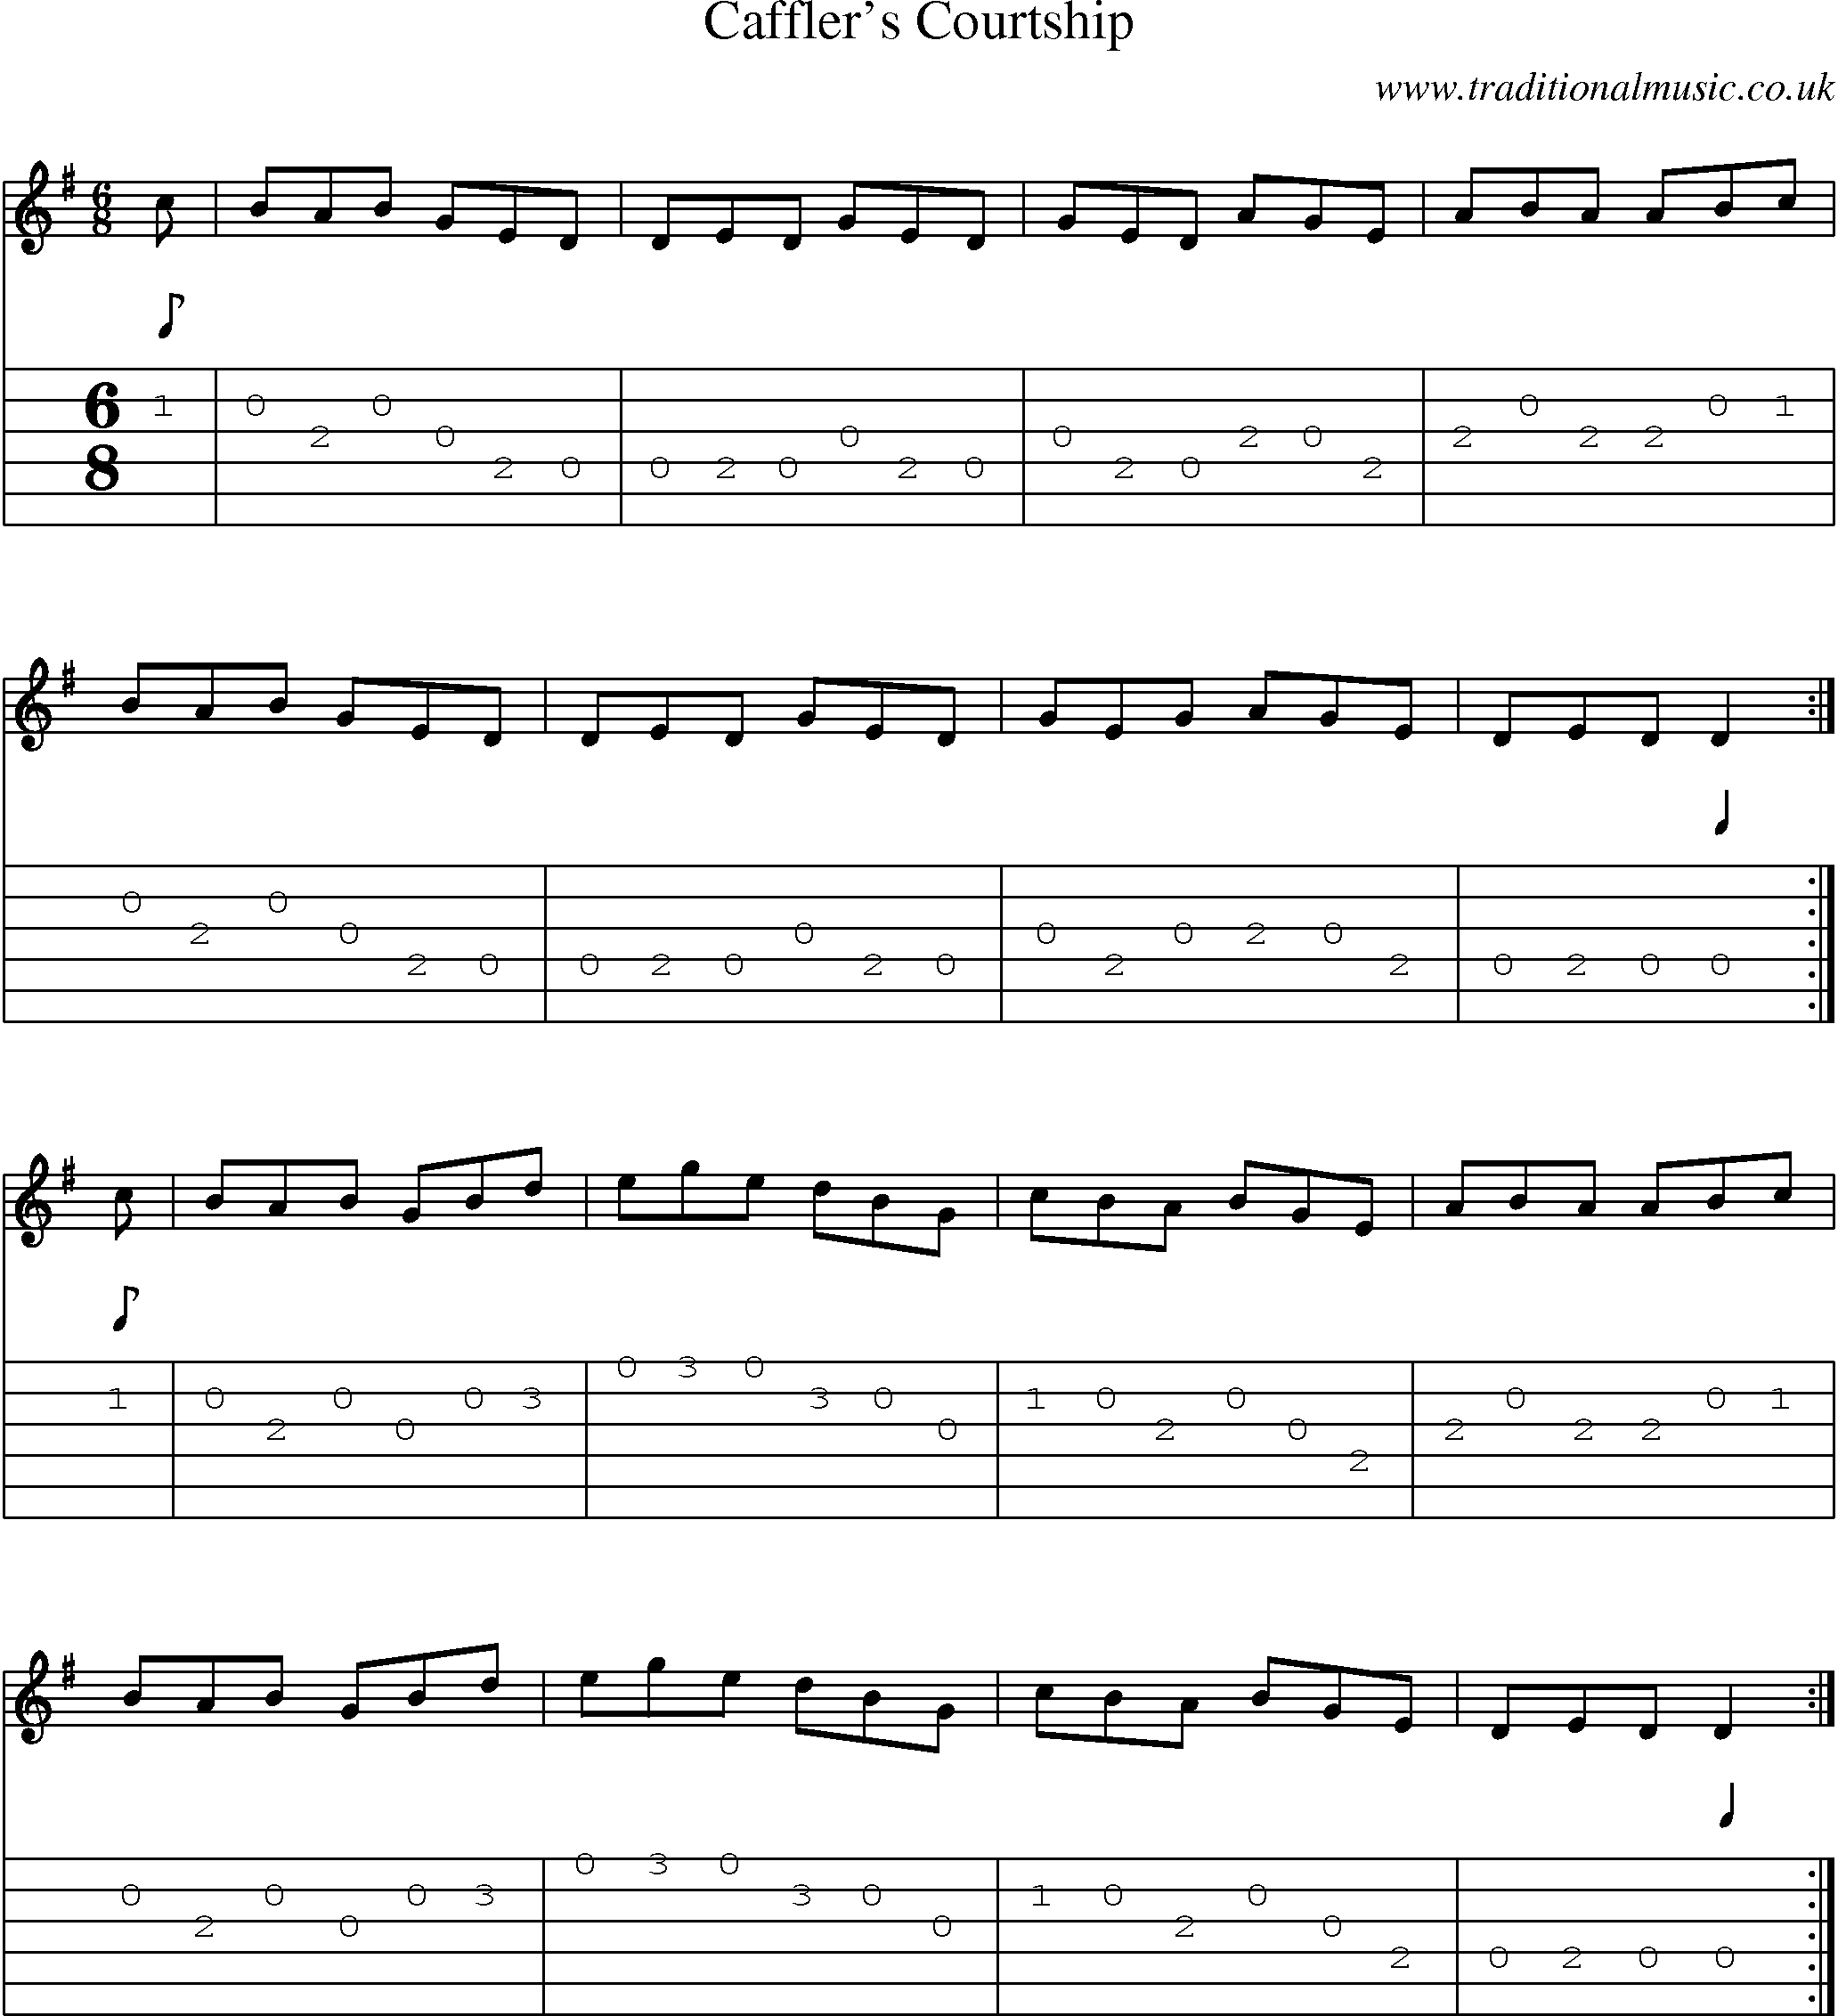 Music Score and Guitar Tabs for Cafflers Courtship